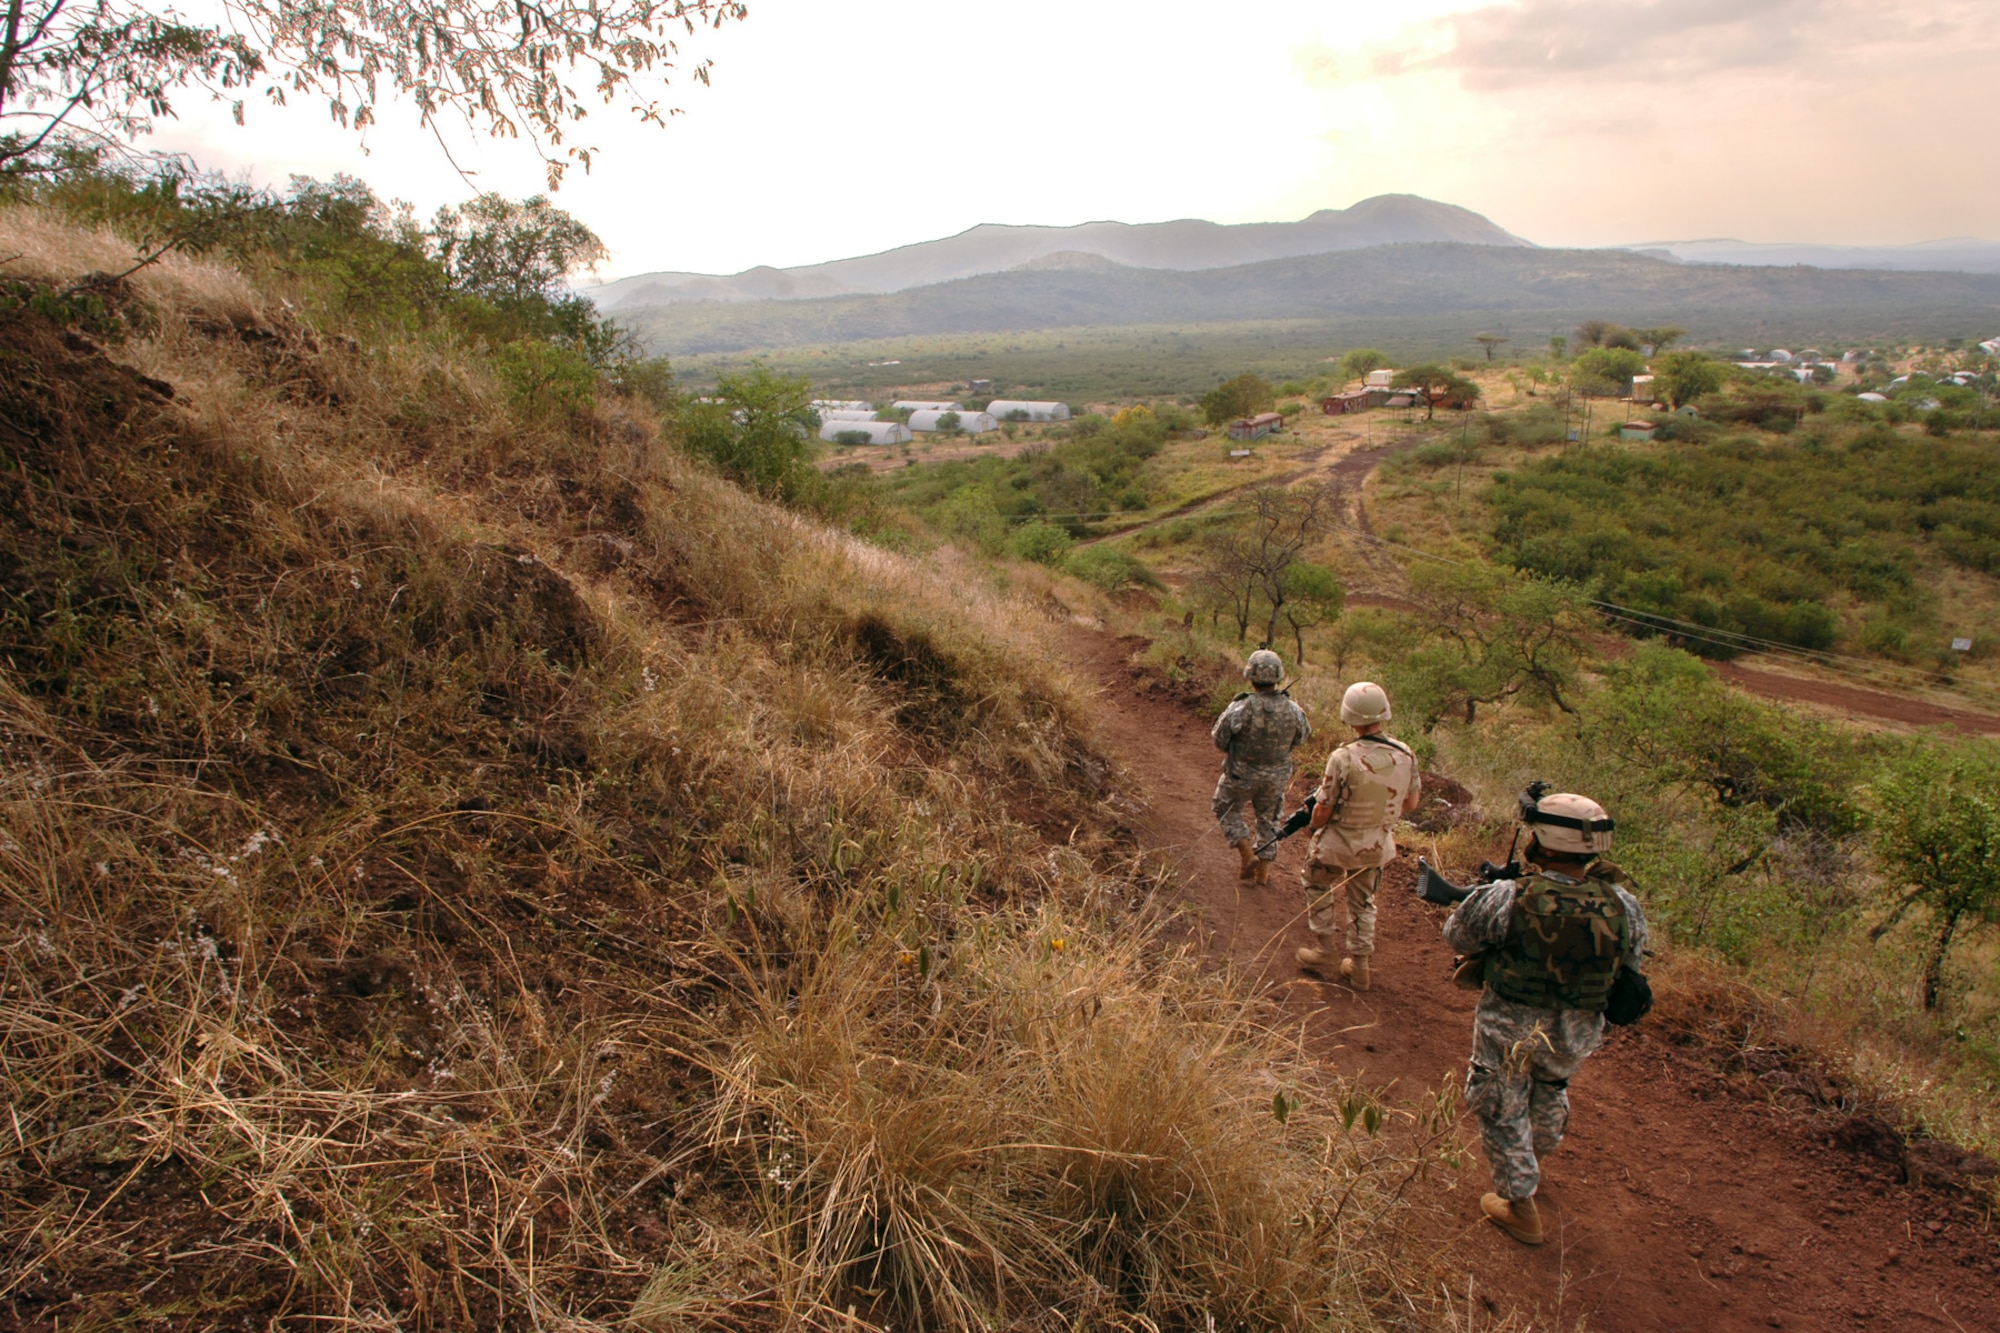 Airman 1st Class Steven Brumley, middle, takes part in a two-mile hike with Guam Army National Guardsmen Specialists Albert Samana and Manno Raigelig as part of a weekly fitness regiment. All are deployed to Contingency Operating Location Bilate, Ethiopia. (U.S. Air Force photo/Master Sgt. Scott Wagers)